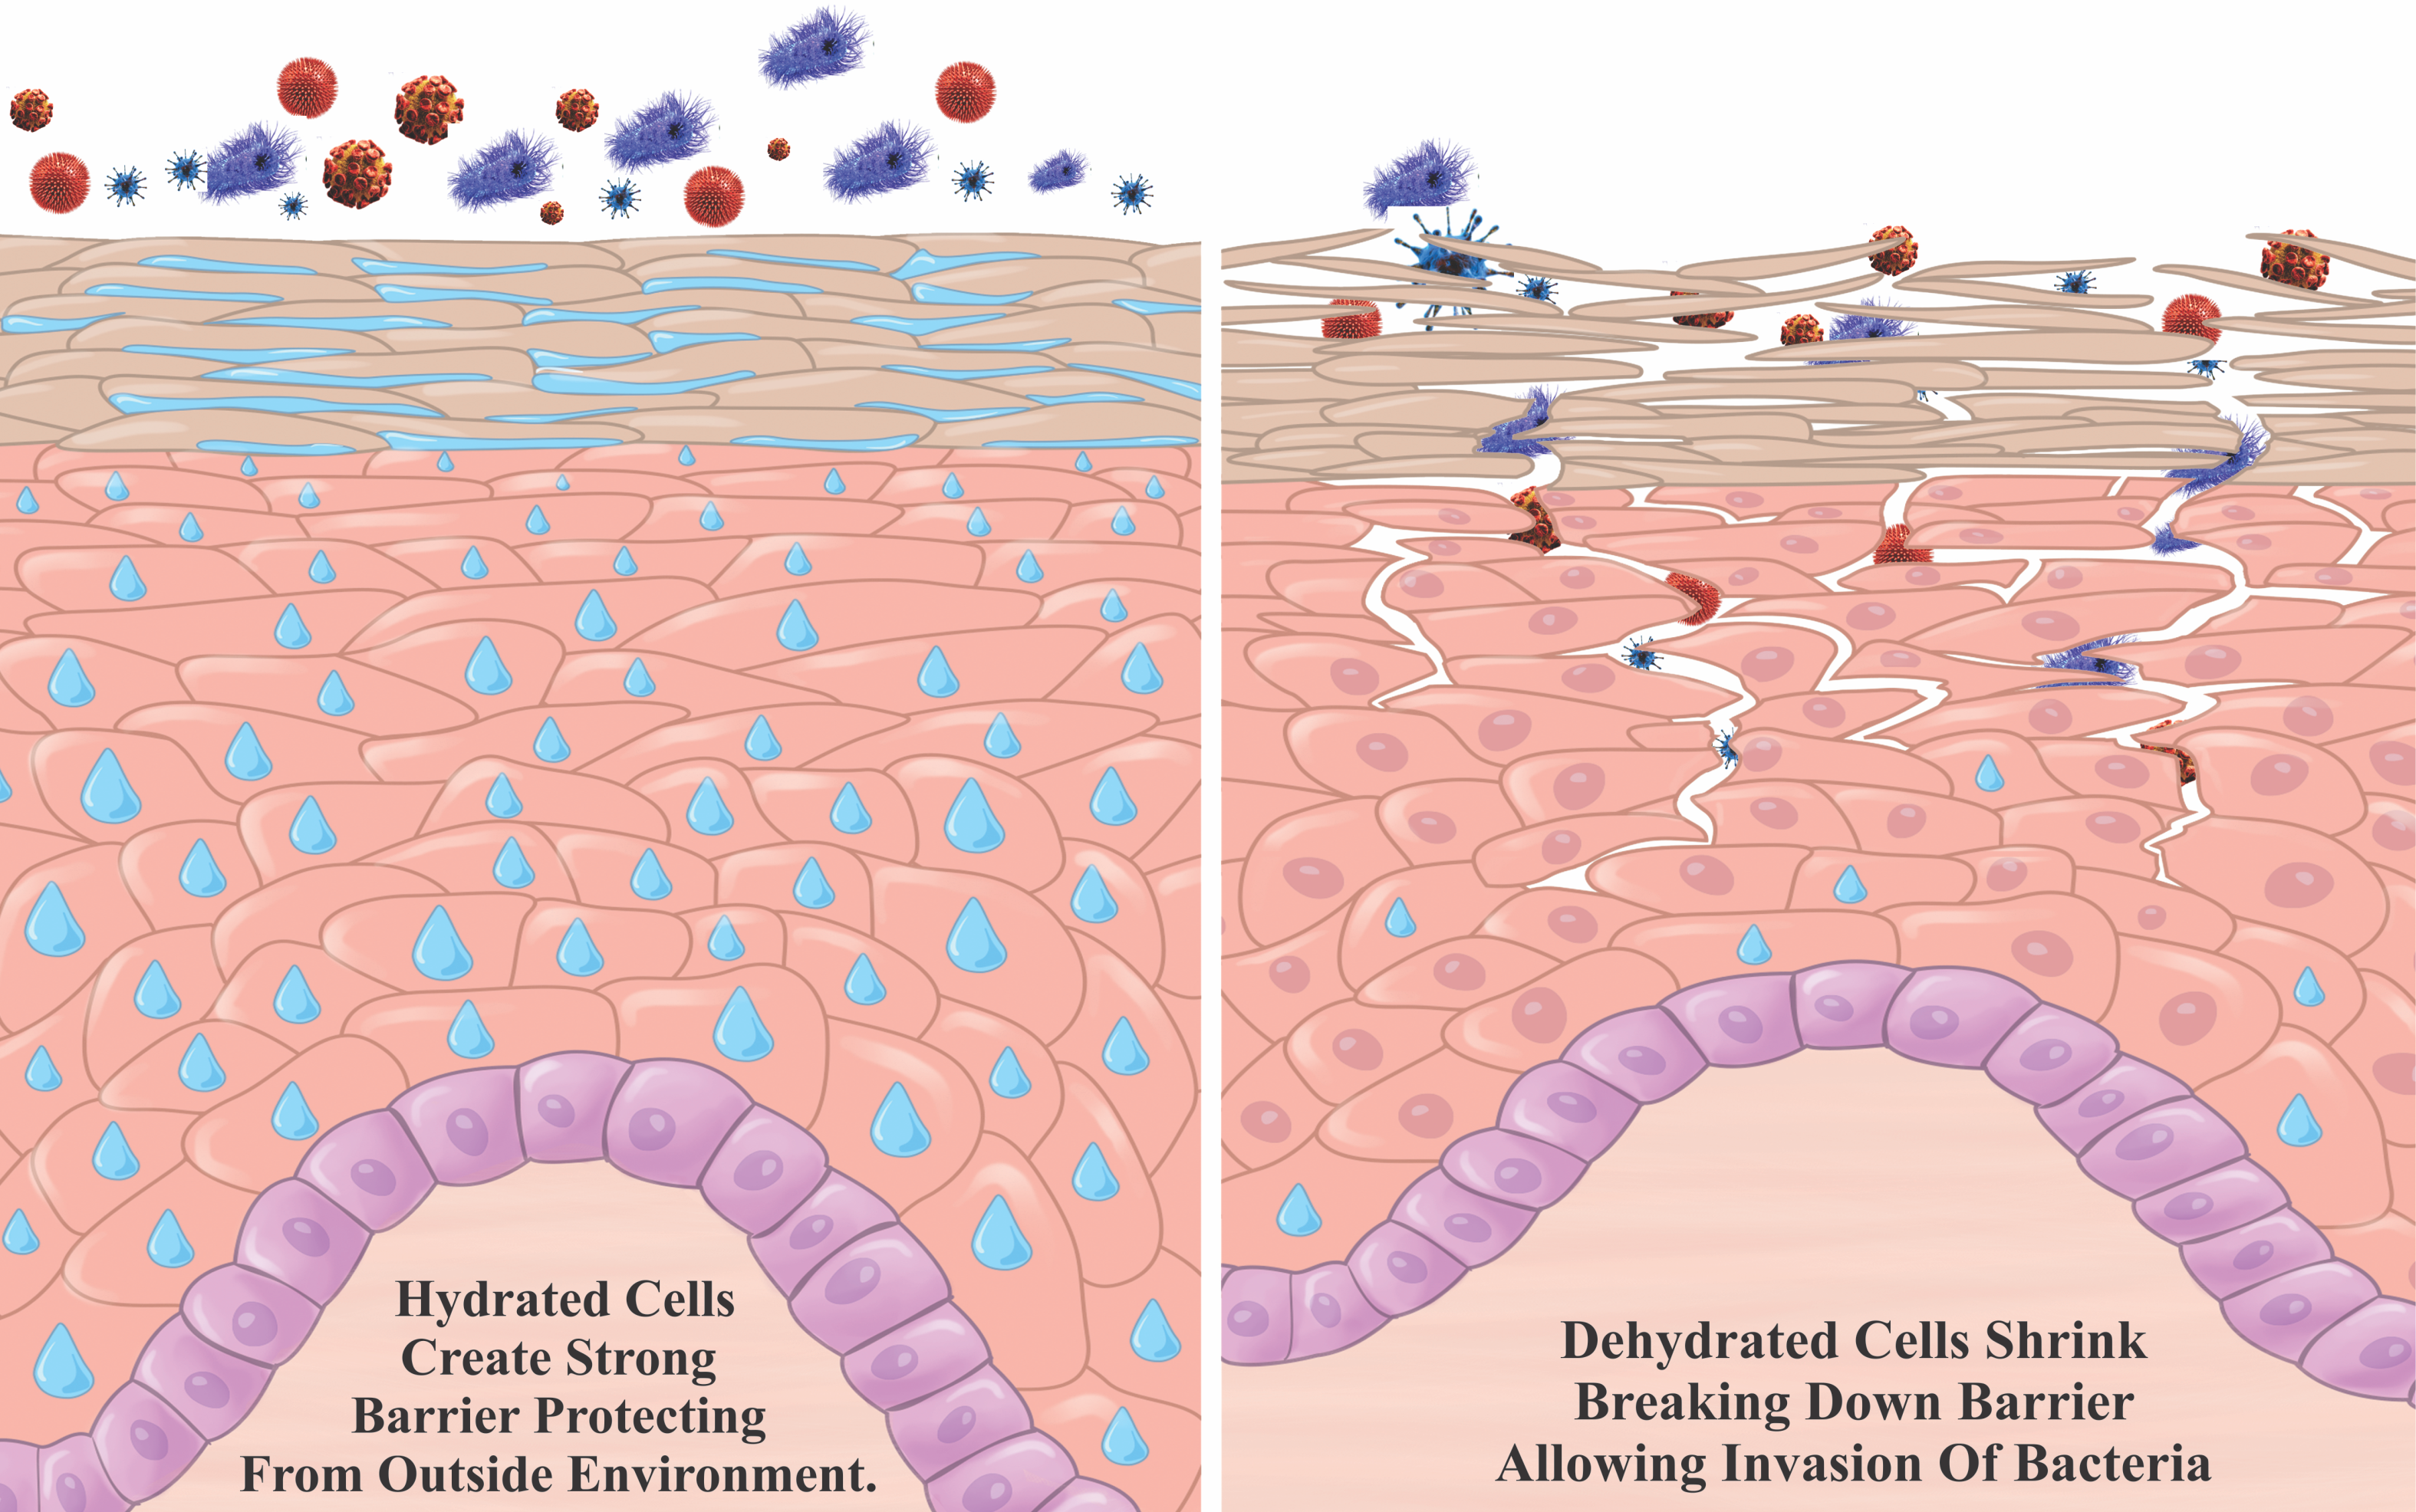 Illustration showing the difference between hydrated and dehydrated cells